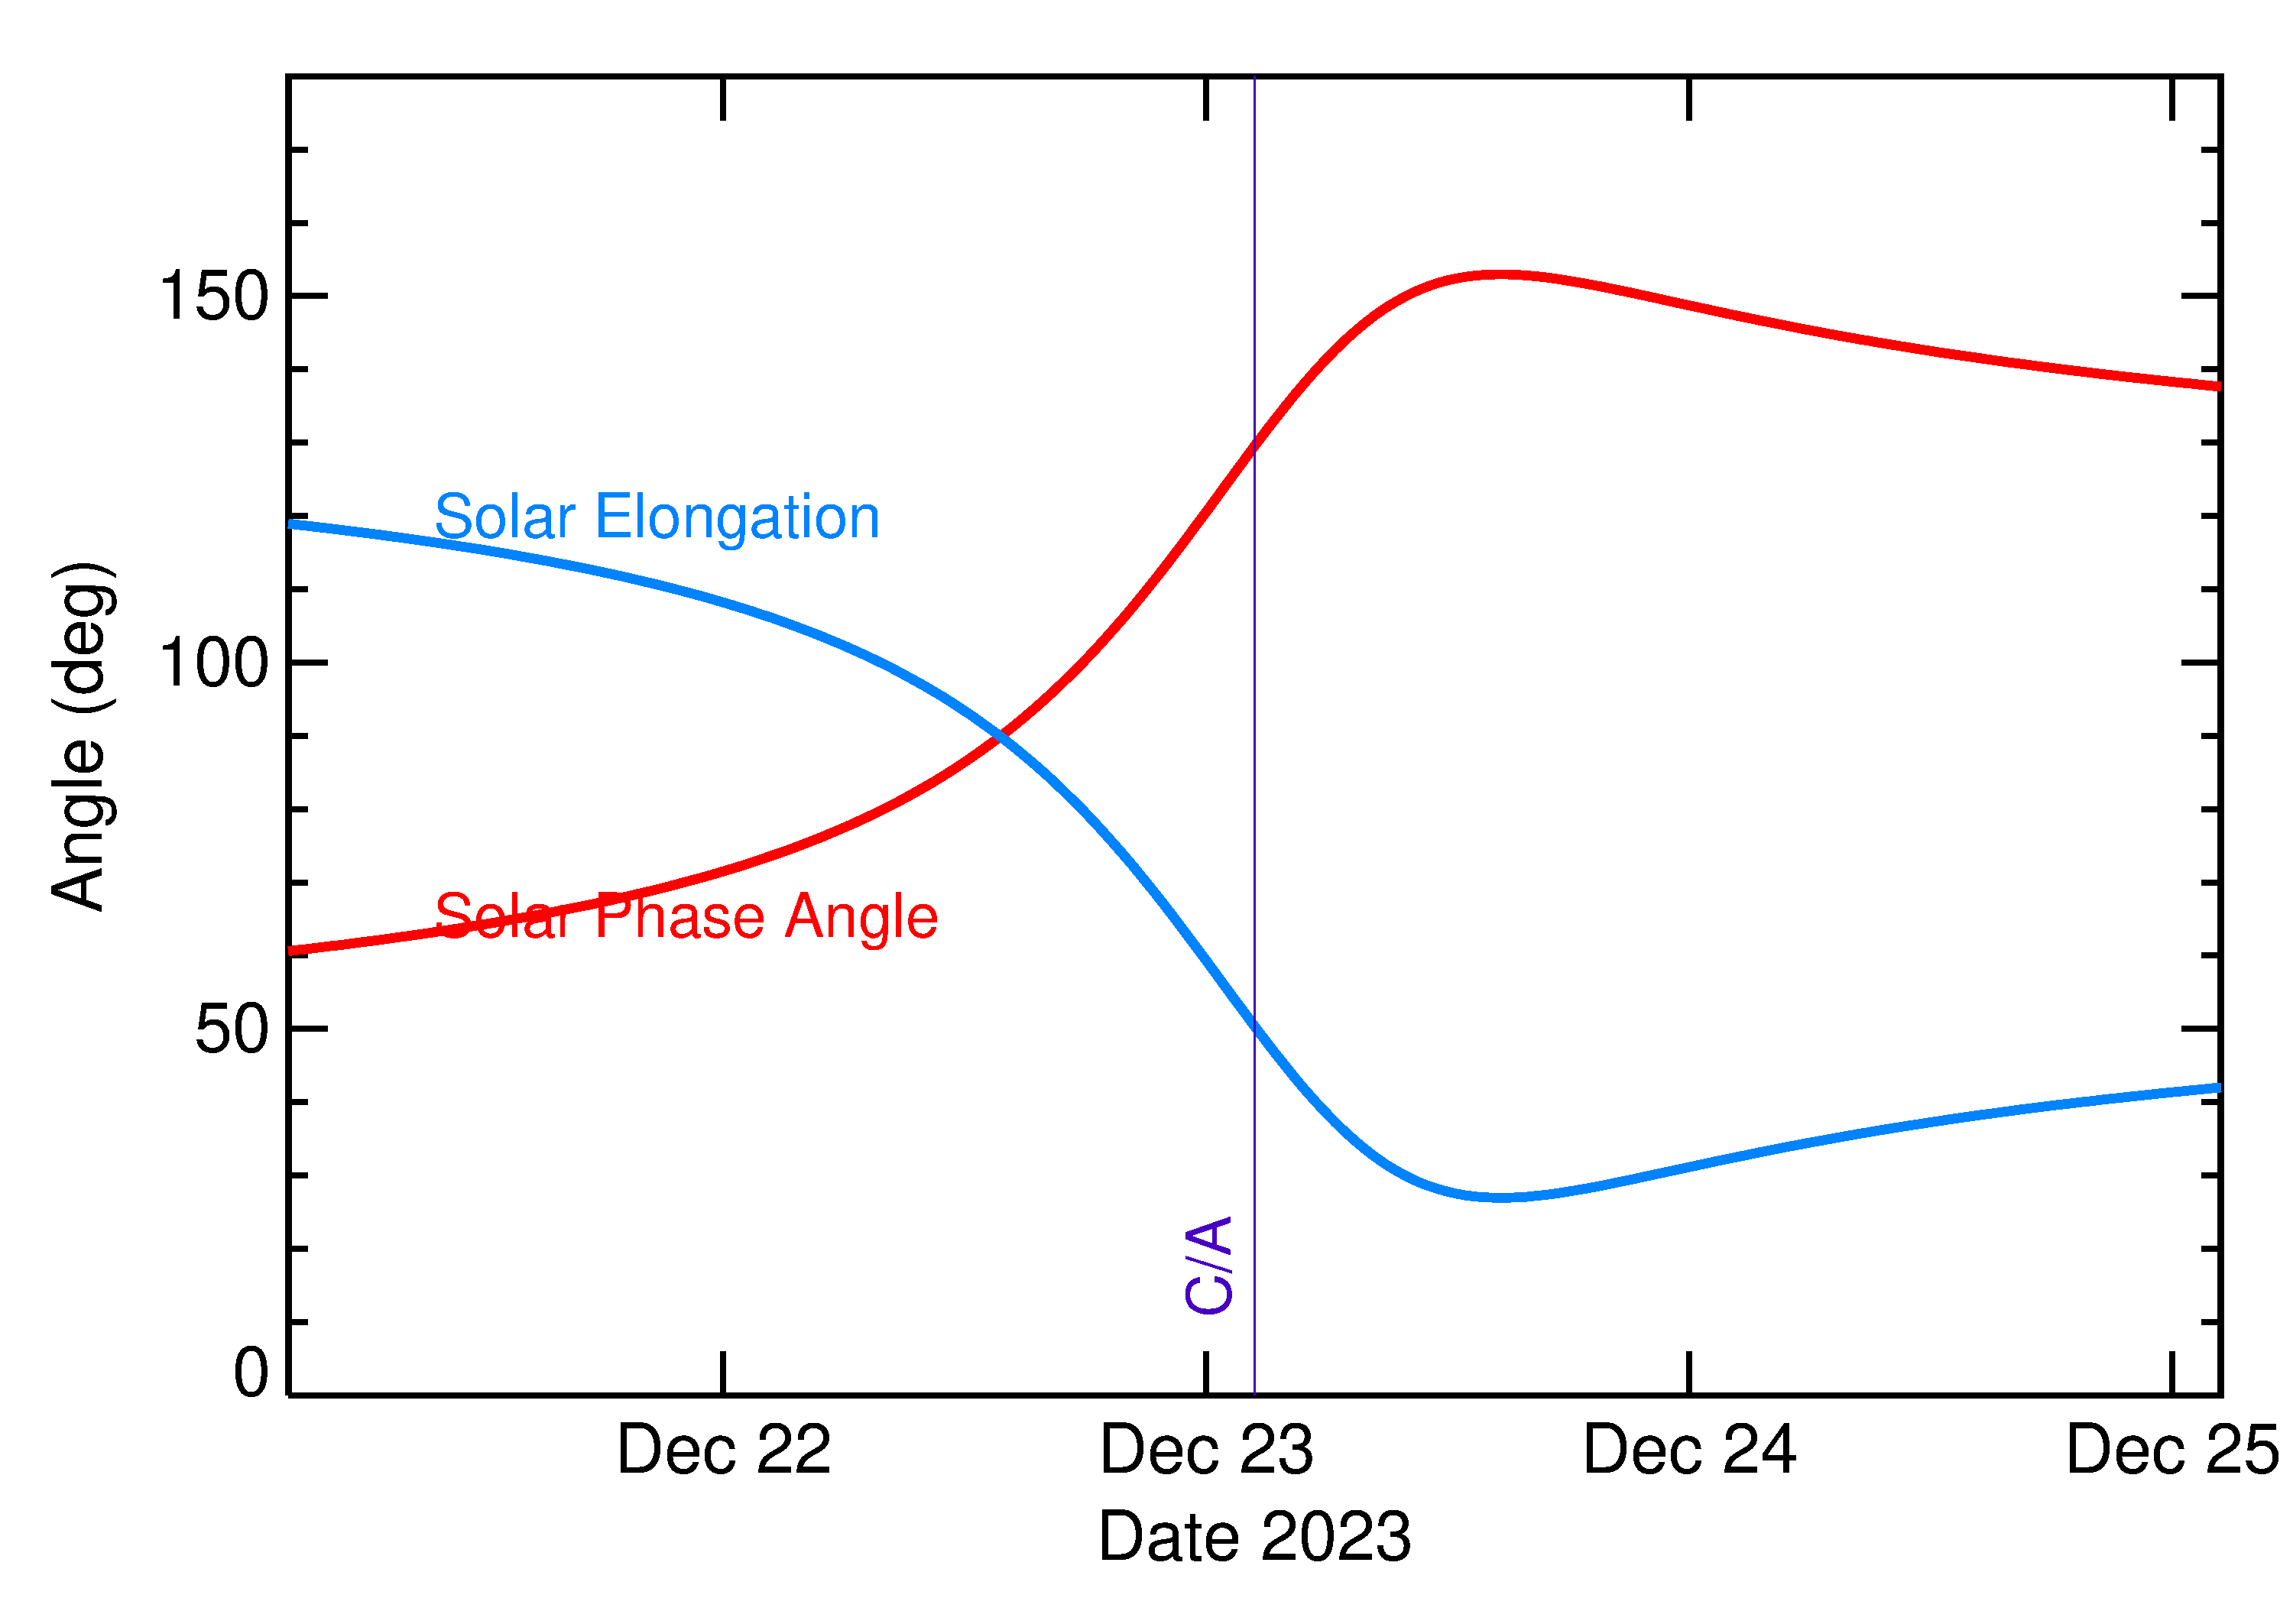 Solar Elongation and Solar Phase Angle of 2023 YP in the days around closest approach